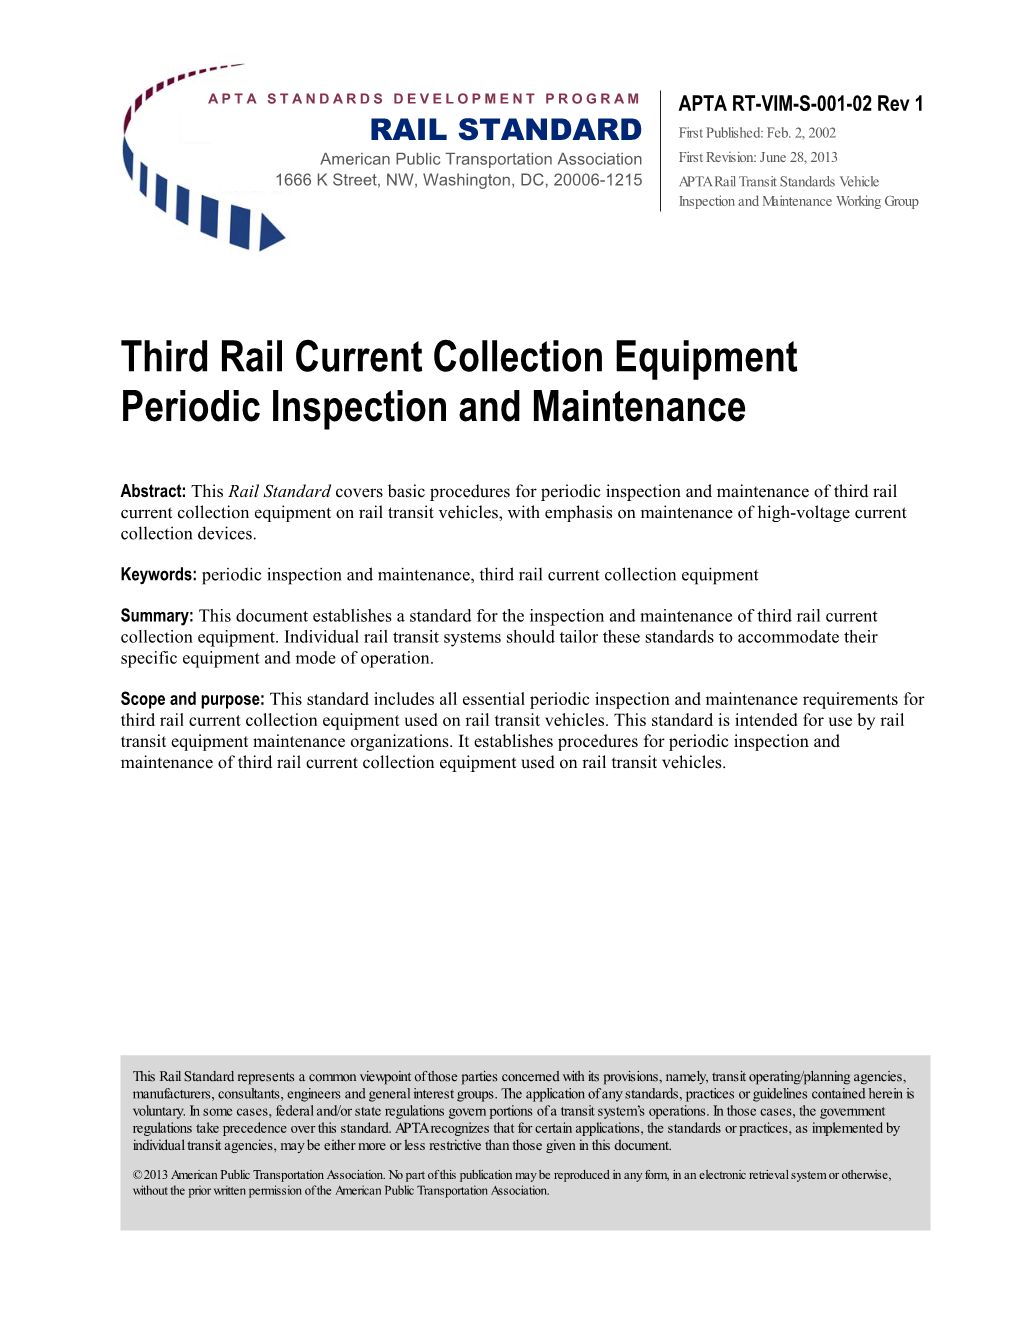 Third Rail Current Collection Equipment Periodic Inspection and Maintenance